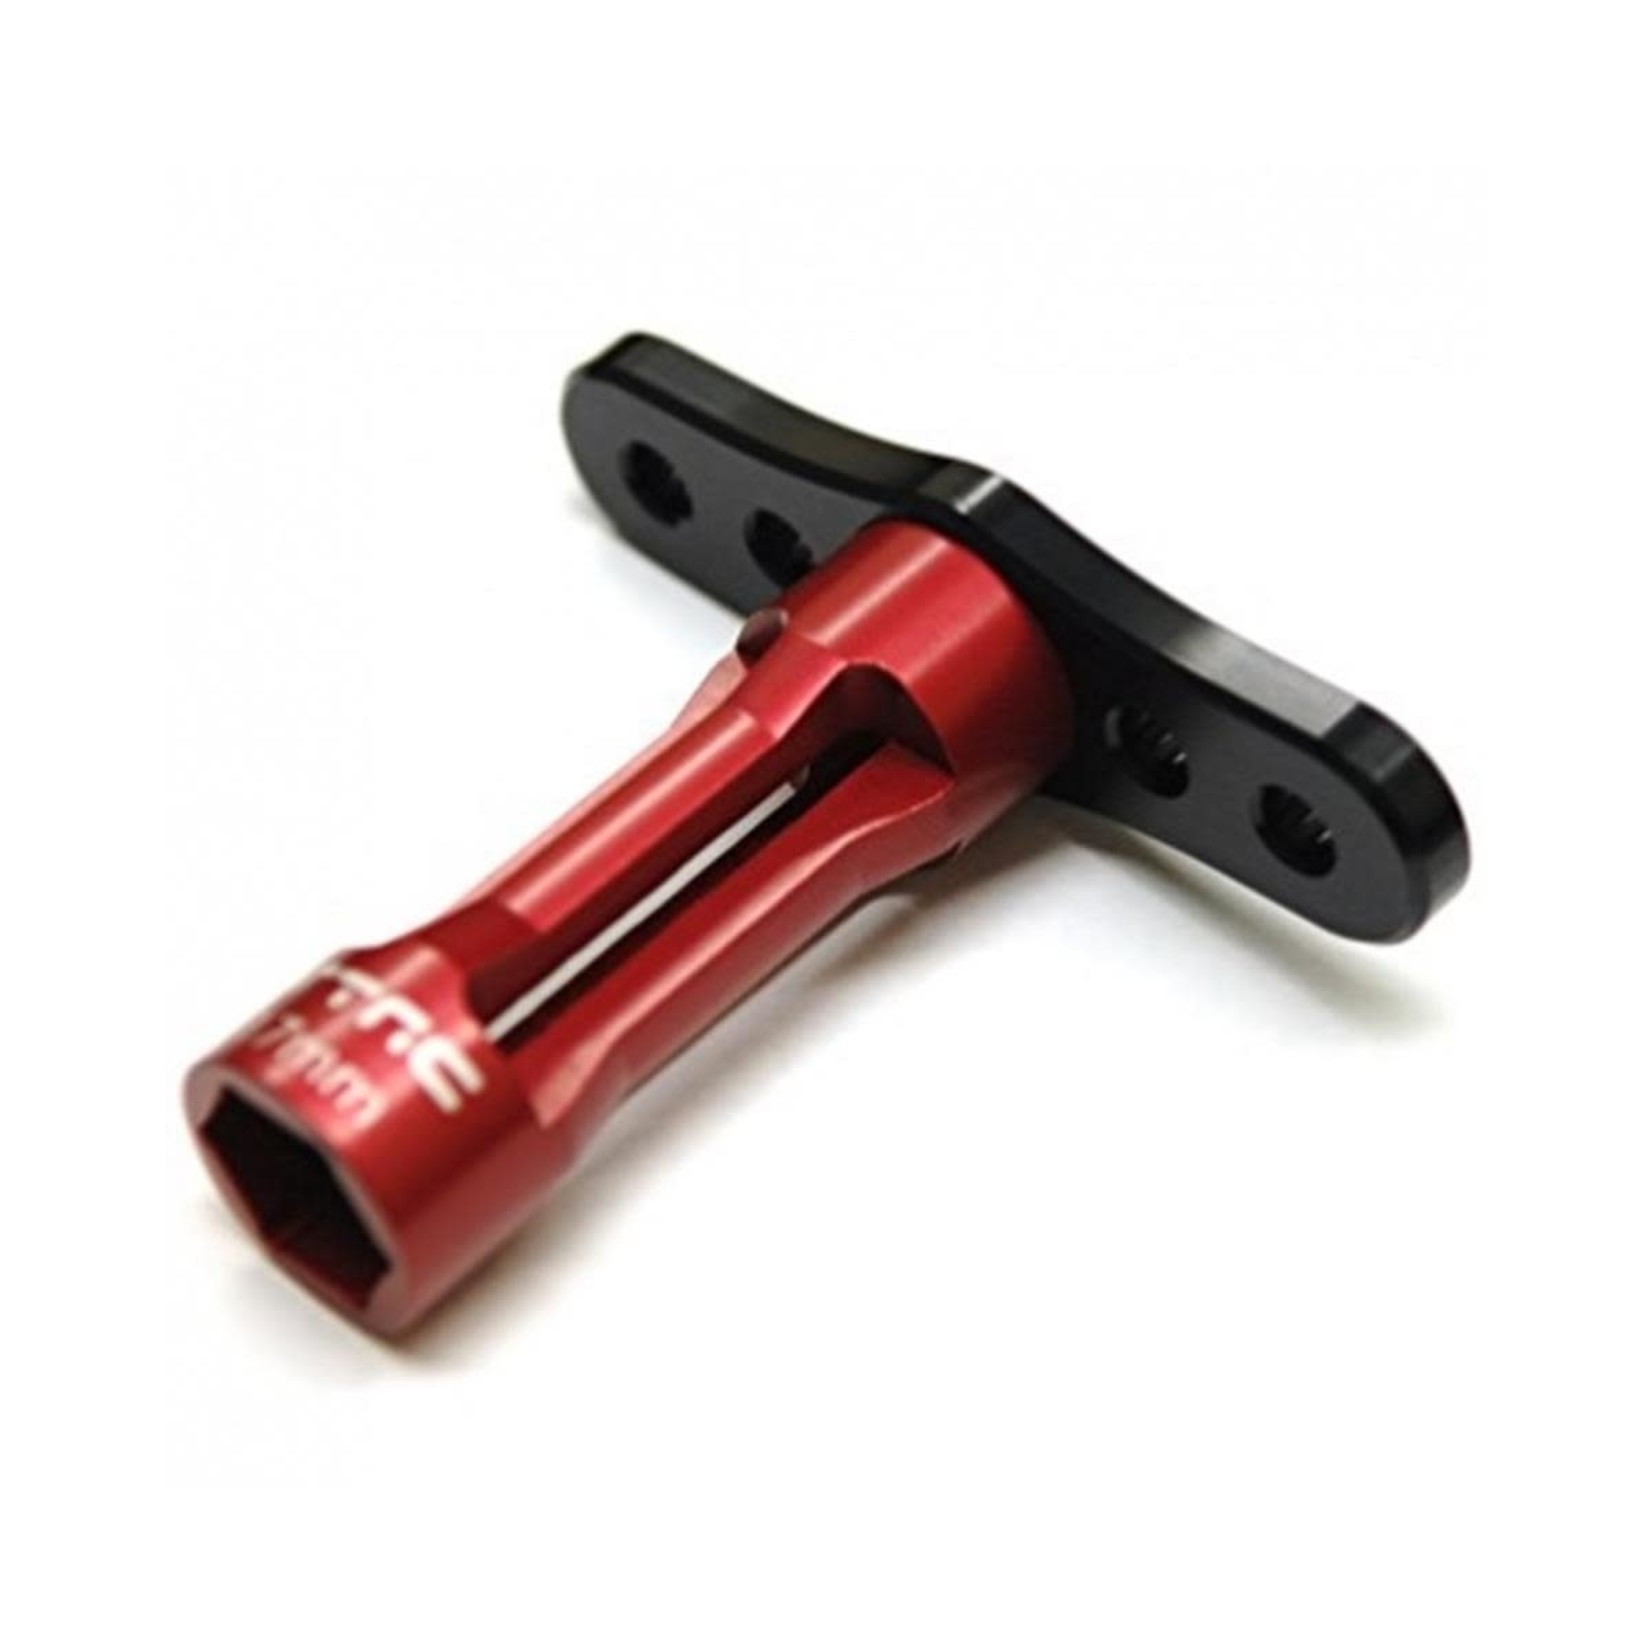 ST Racing Concepts ST Racing Concepts Aluminum Long Shank 17mm Hex Nut Wrench (Red/Black) #SPTA17BKR